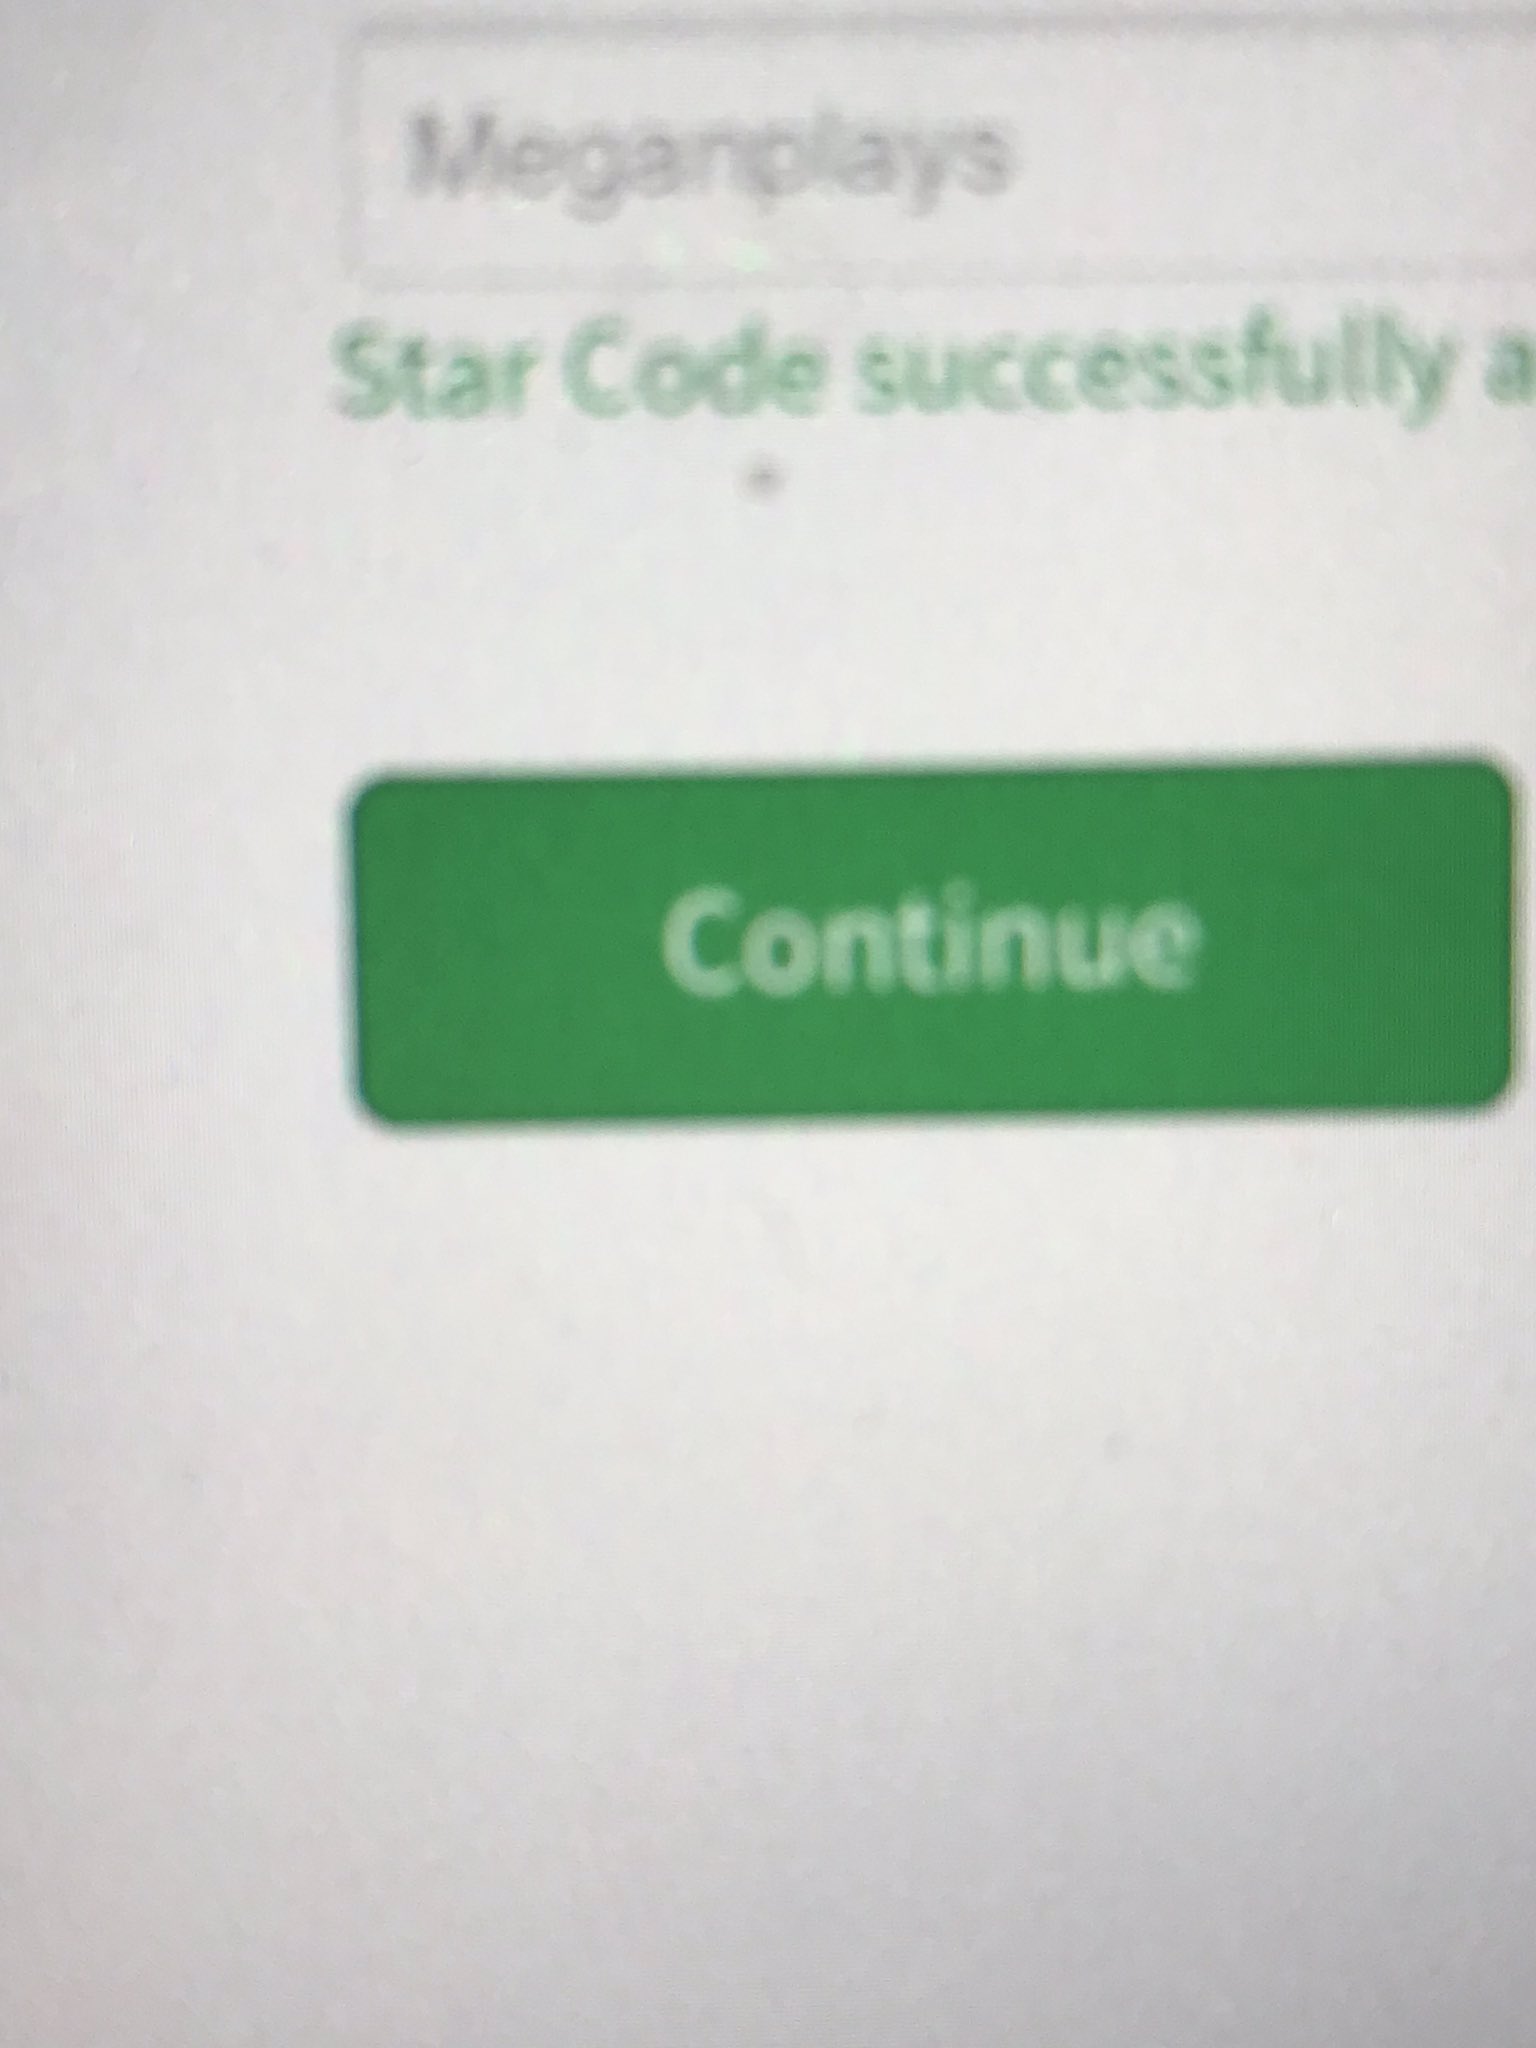 Kyah On Twitter Meganplays I Used Your Star Code To Purchase 50